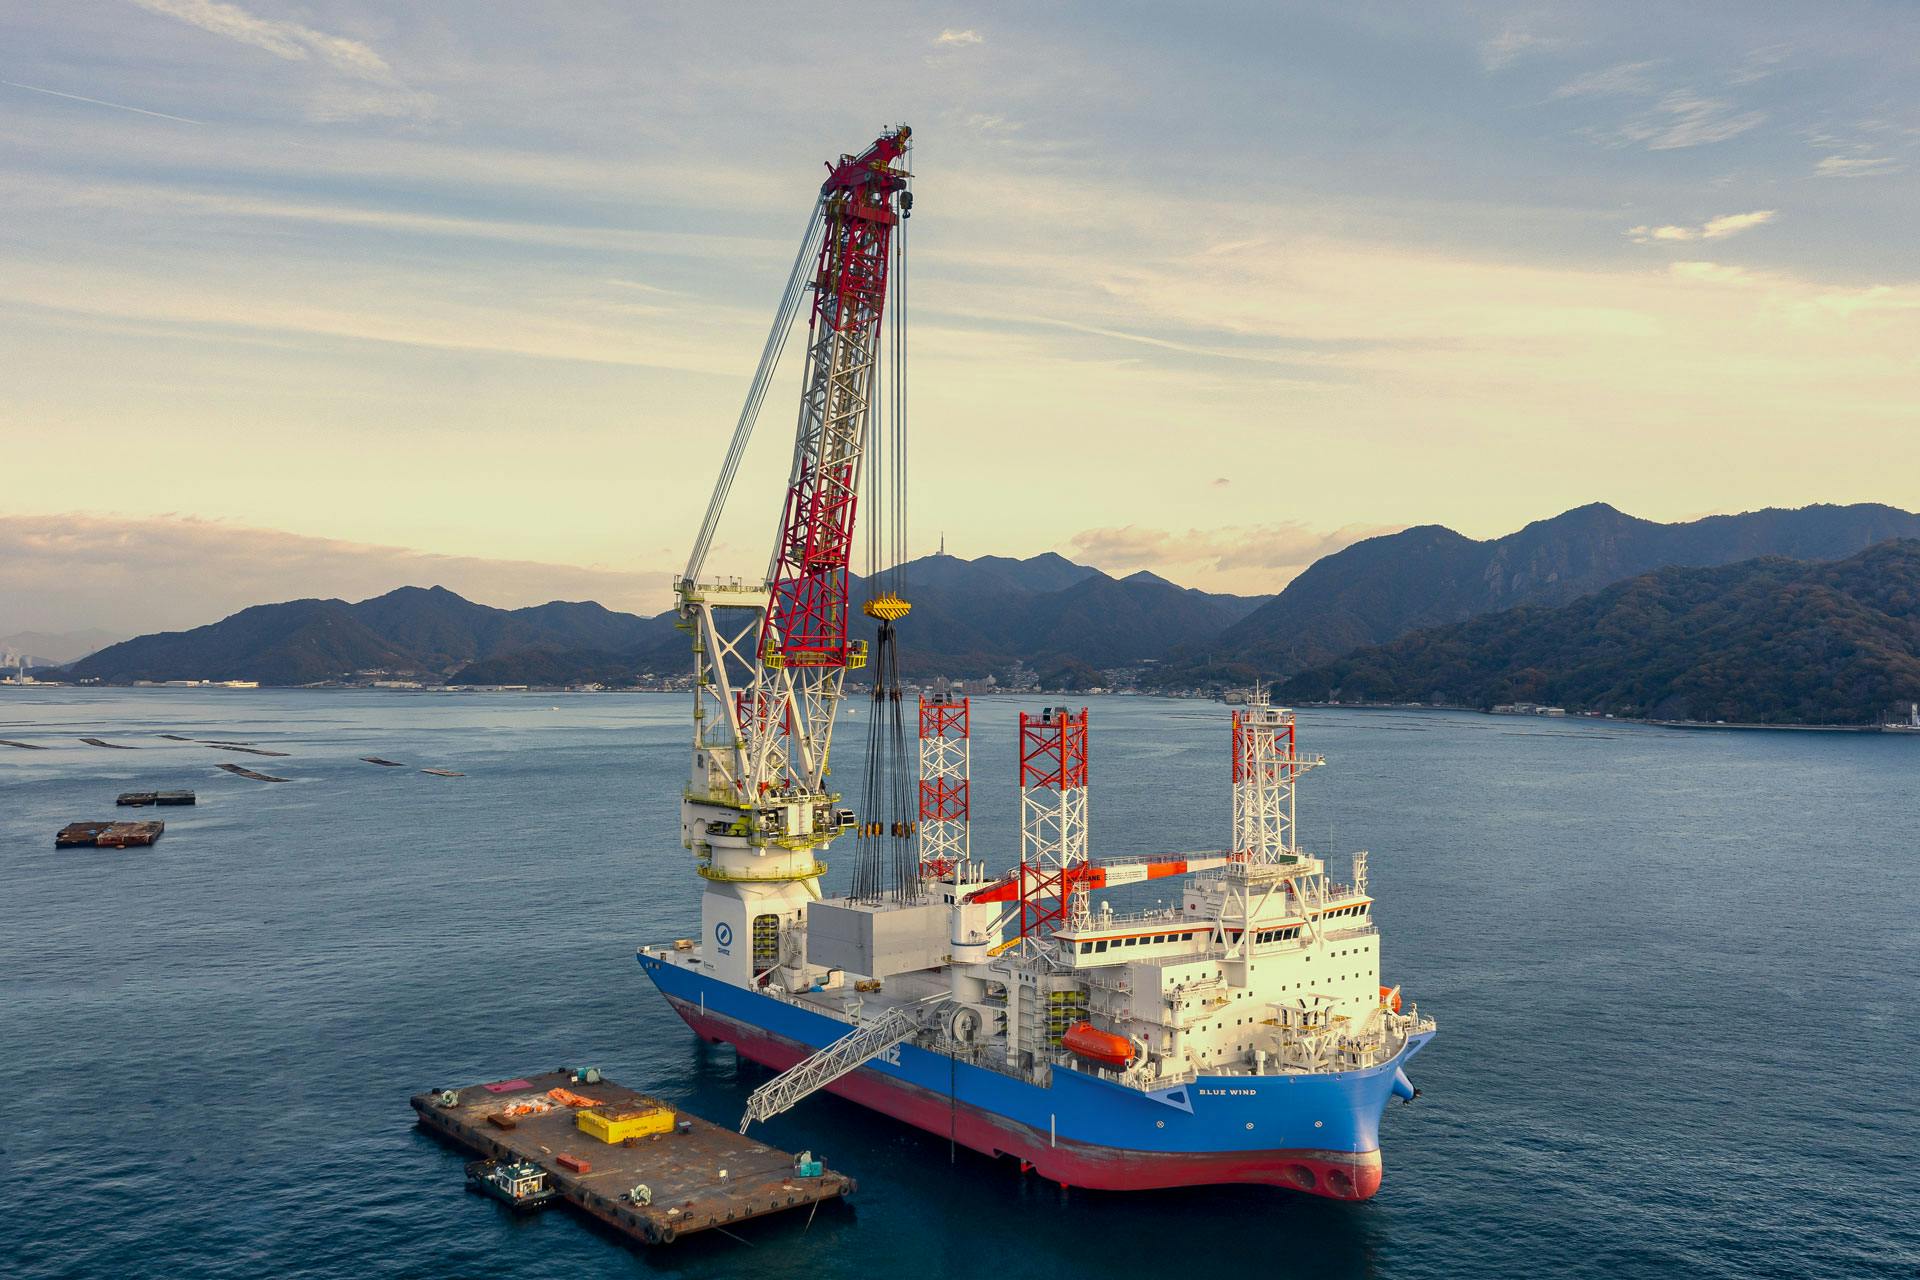 Shimizu Telescopic Leg Crane, offshore with mountains in the background